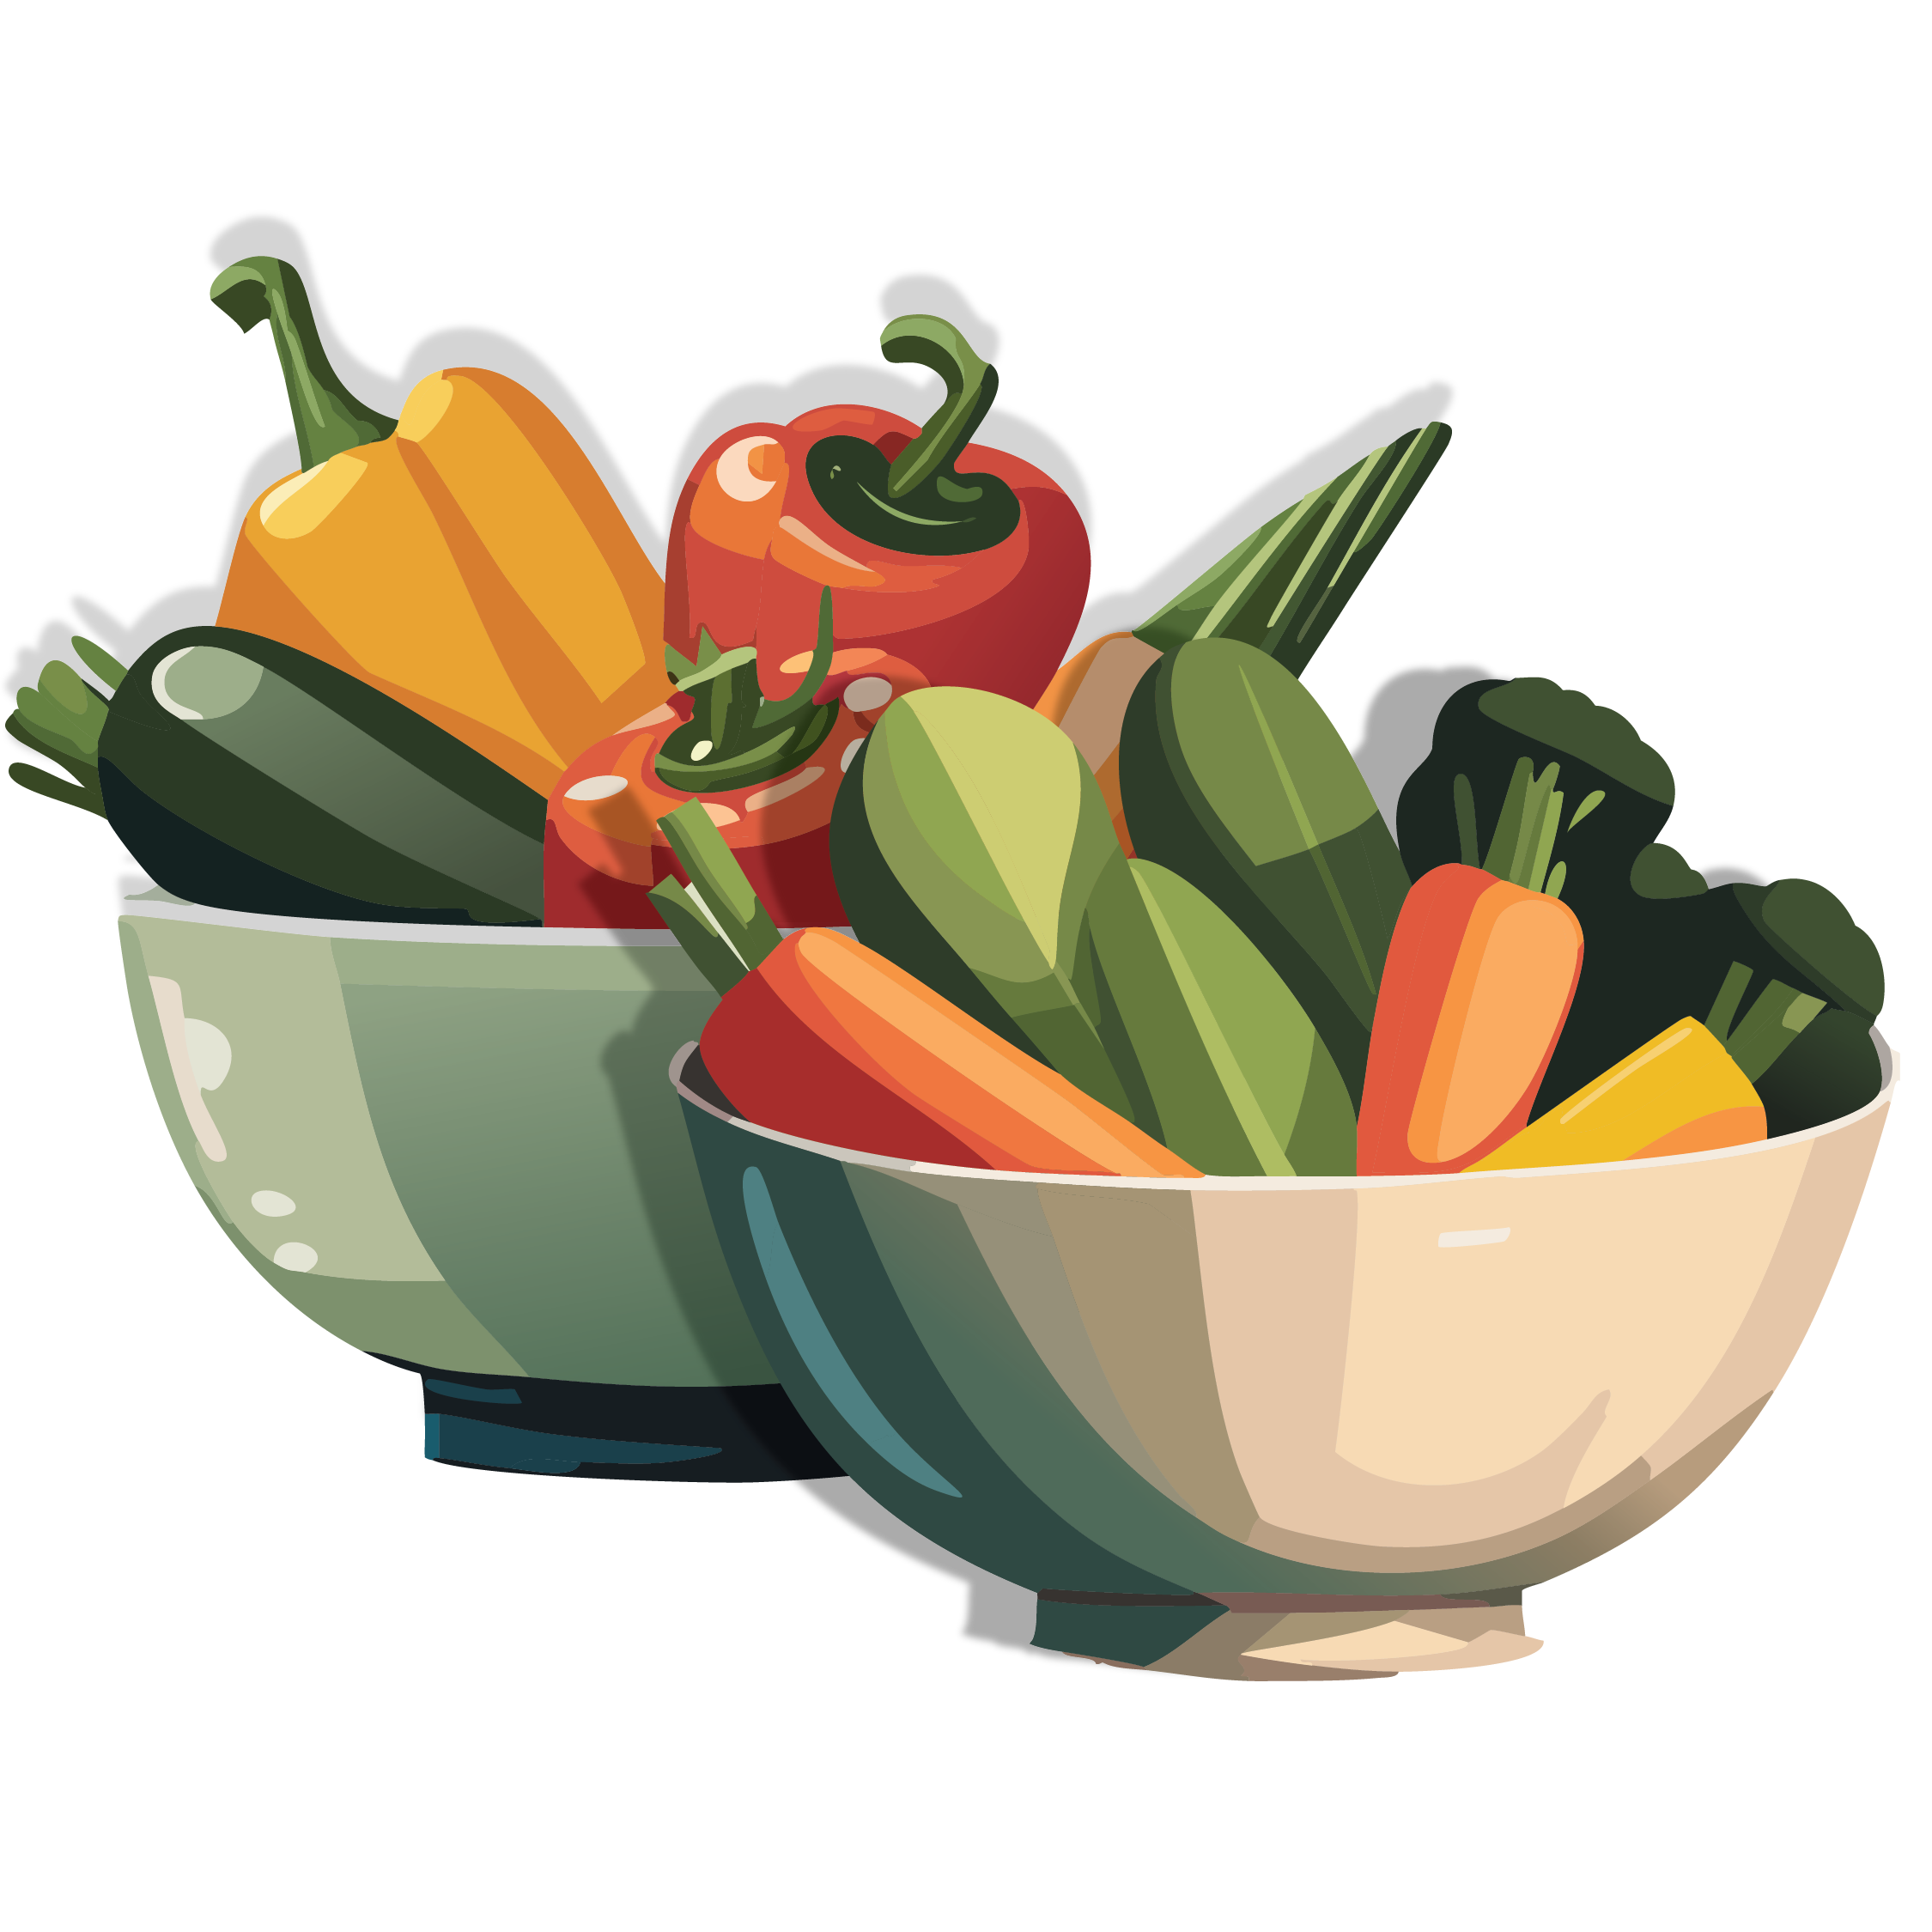 Illustrations of bowls full of fresh veggies like peppers, carrots and greens